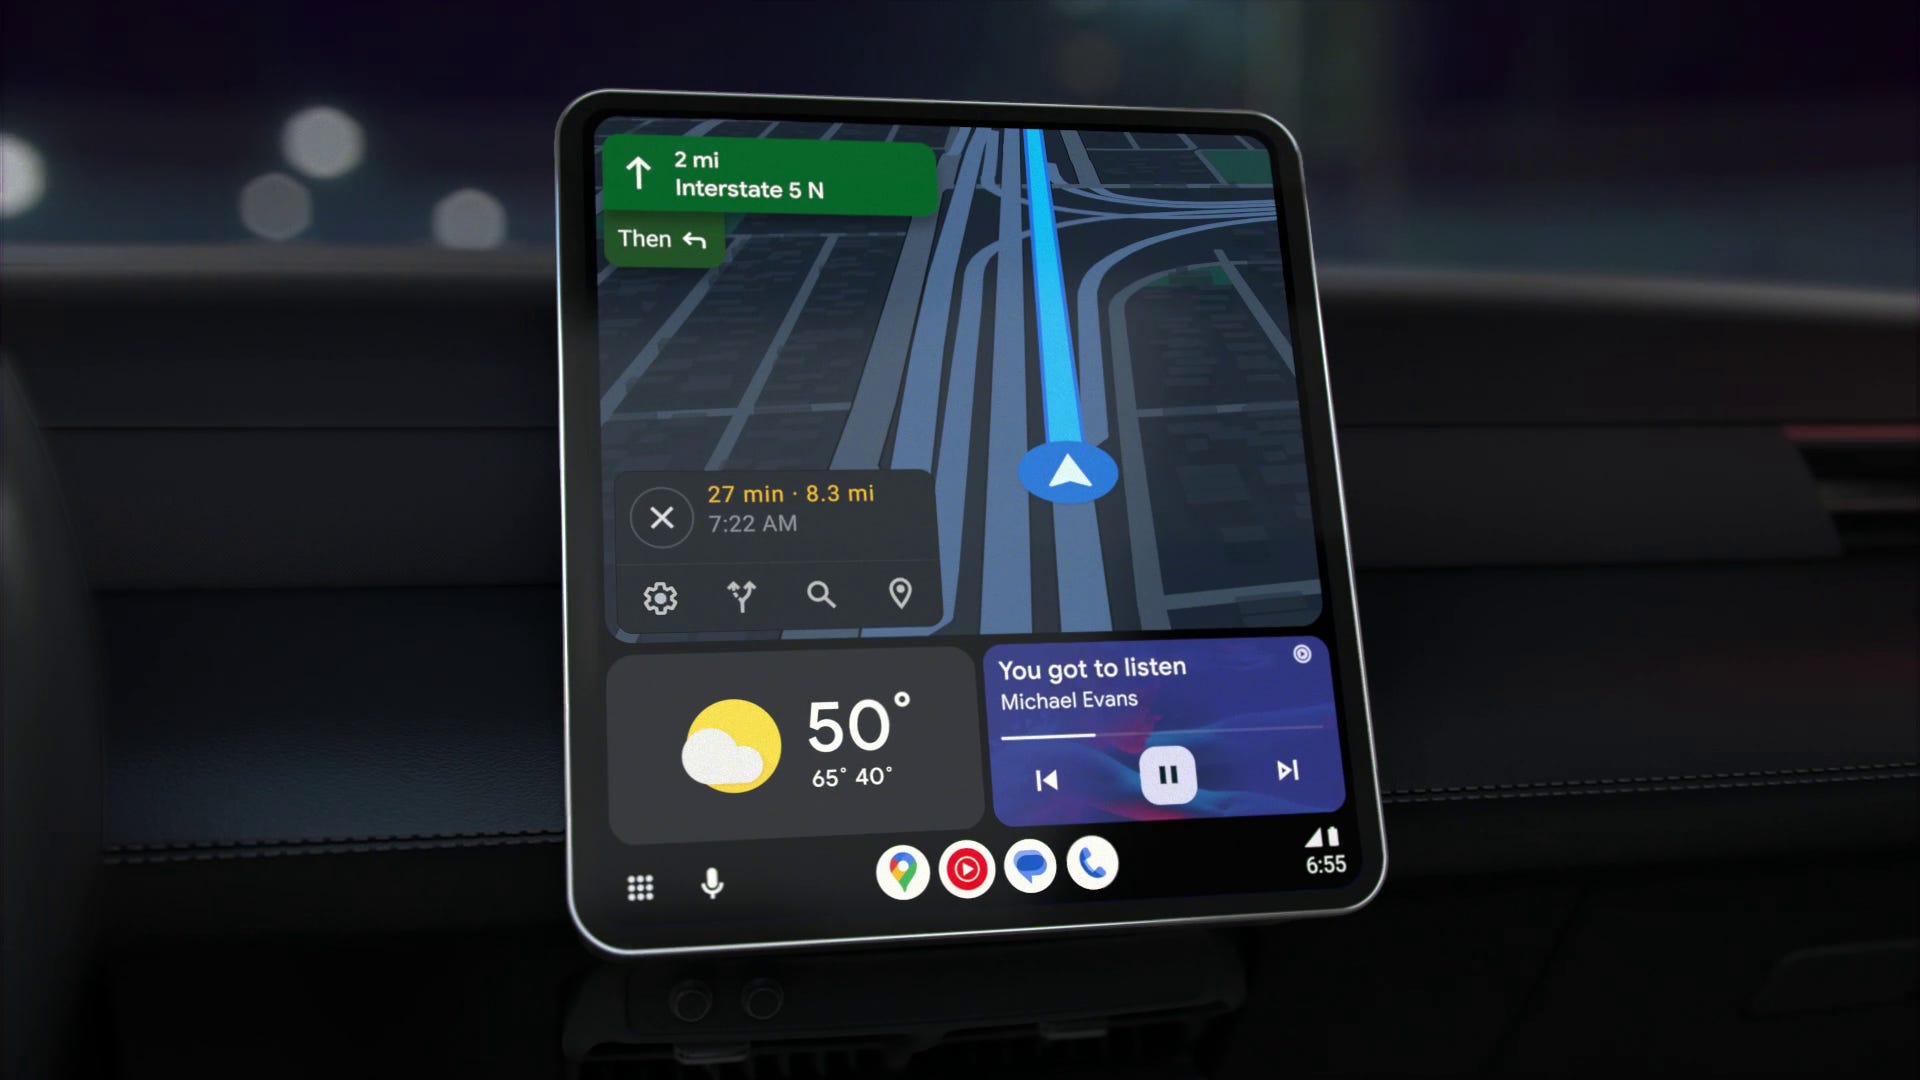 Google's revamped Android Auto experience is now available